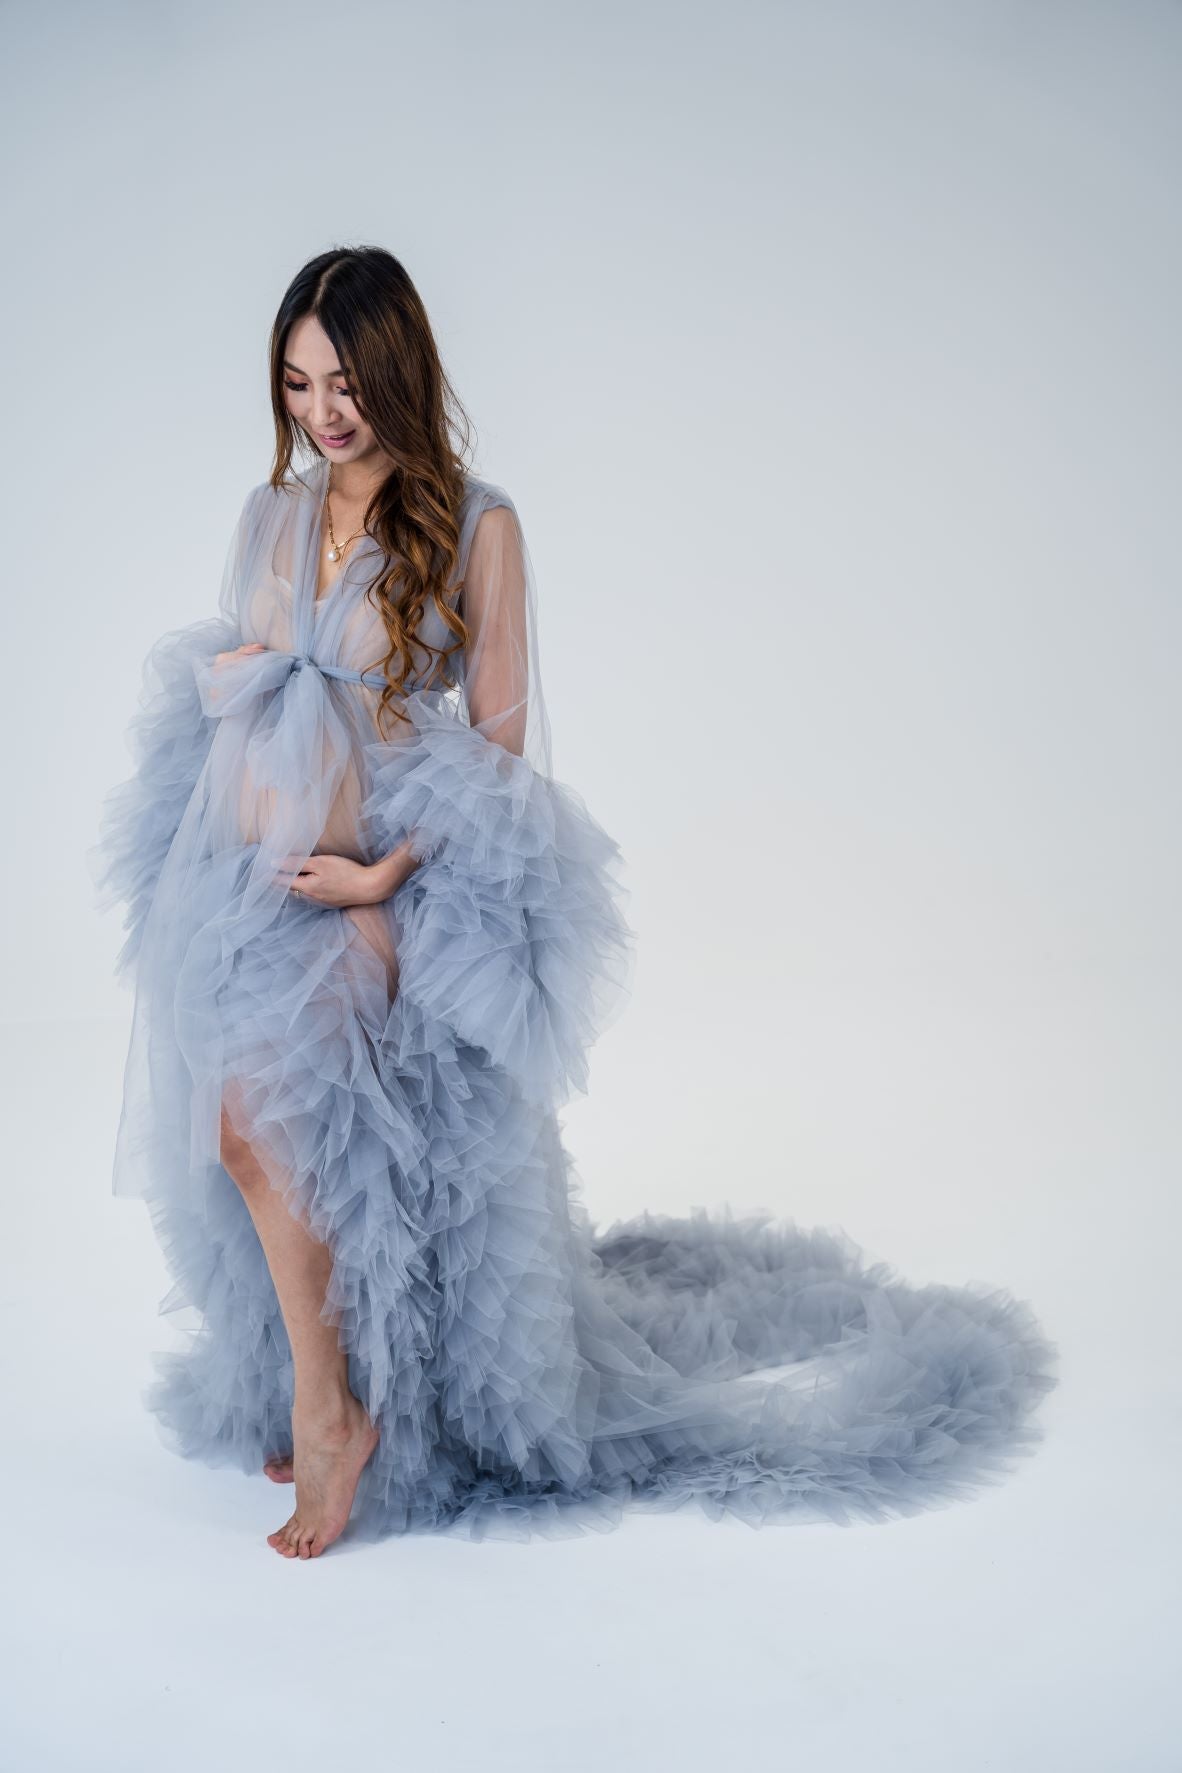 Gray Tulle Robe - Maternity Photoshoot Dress Hire – Luxe Bumps AU